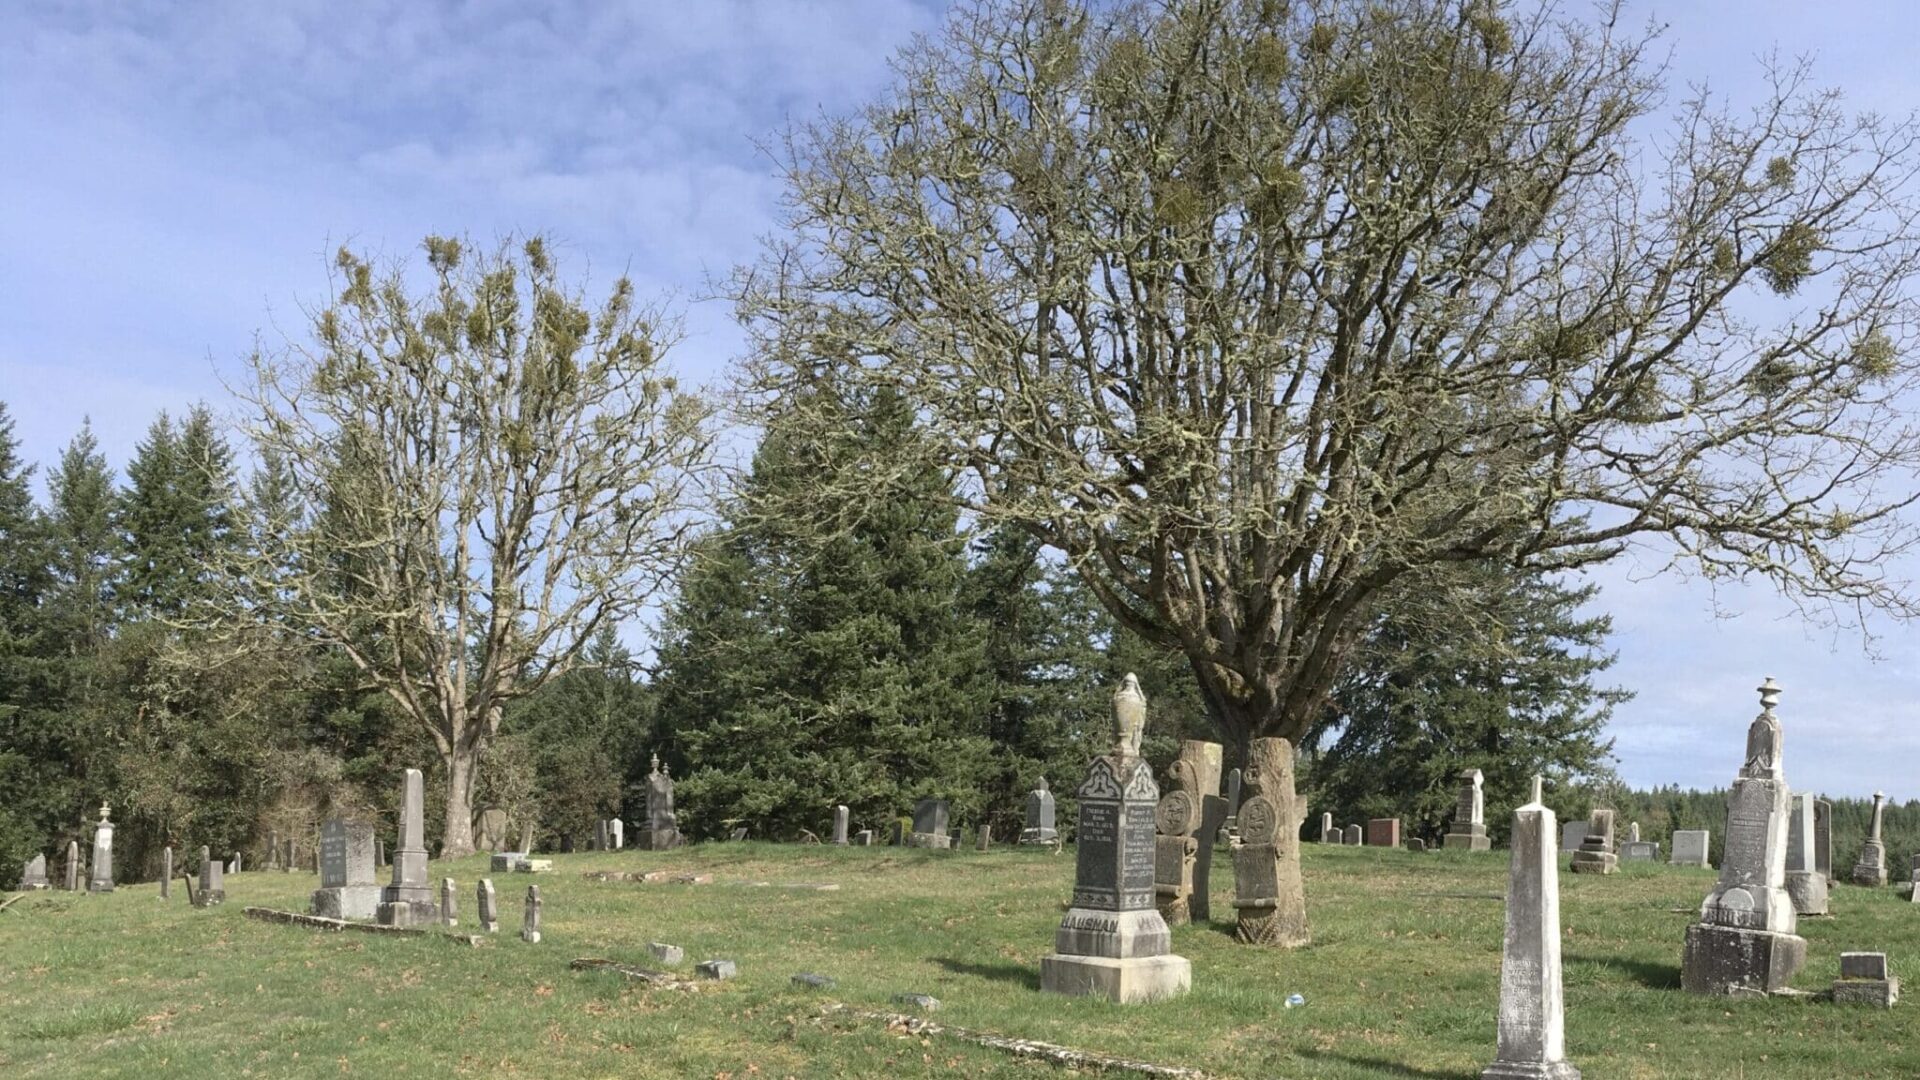 A cemetery view over the grass with trees